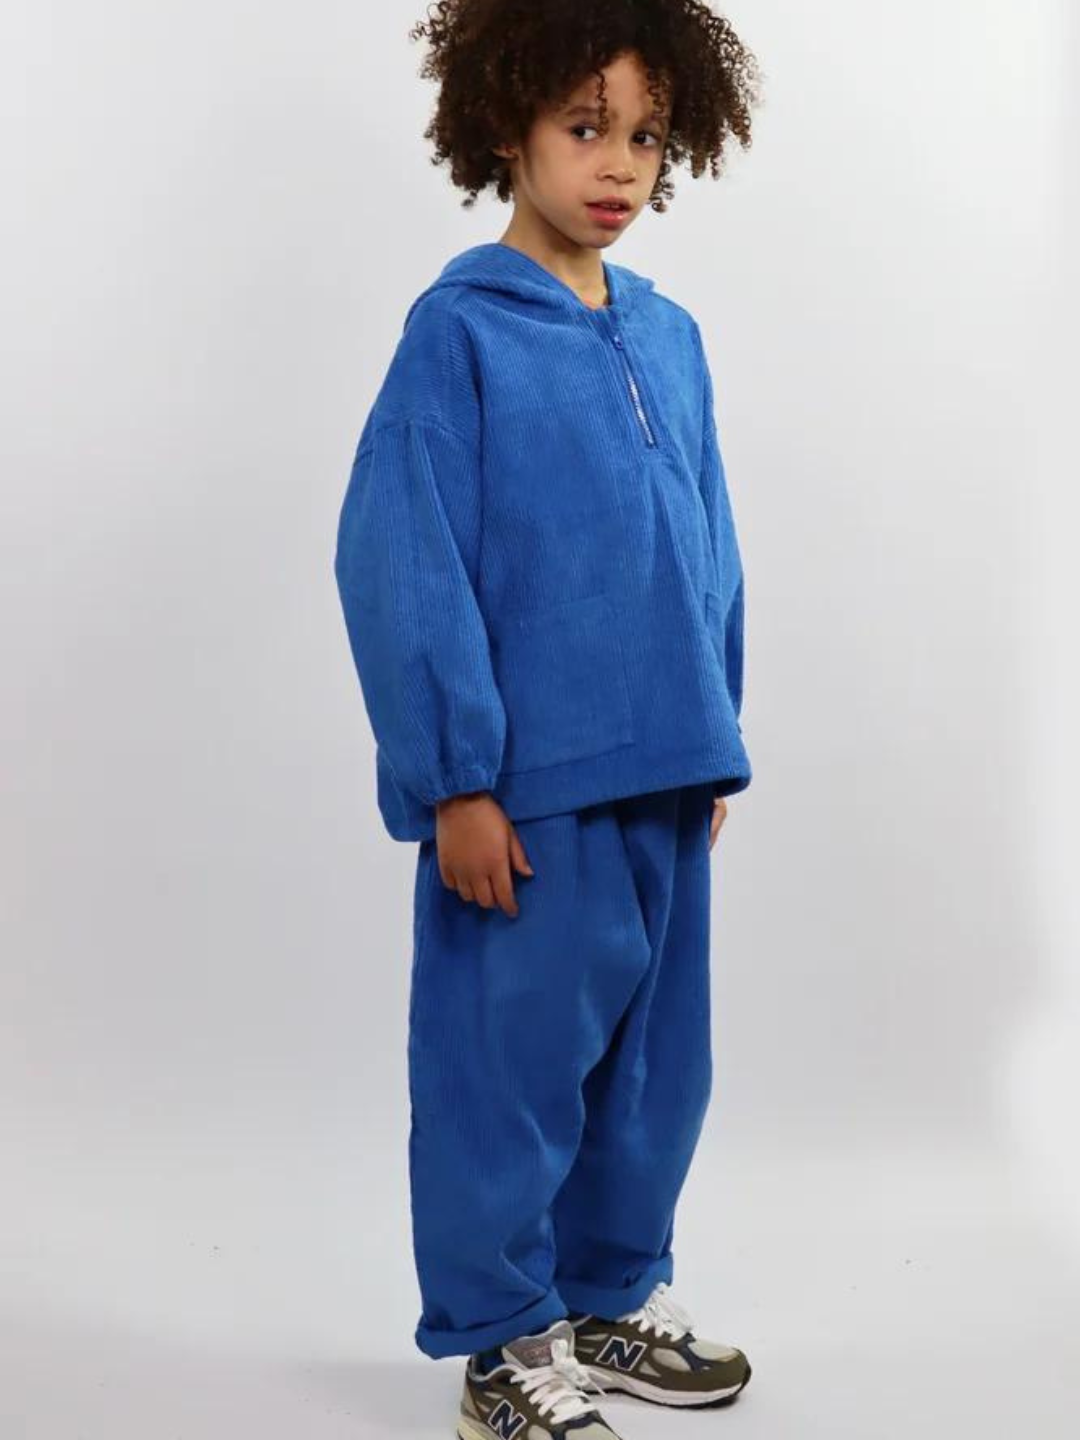 Child wearing blue kids' hooded smock and pants